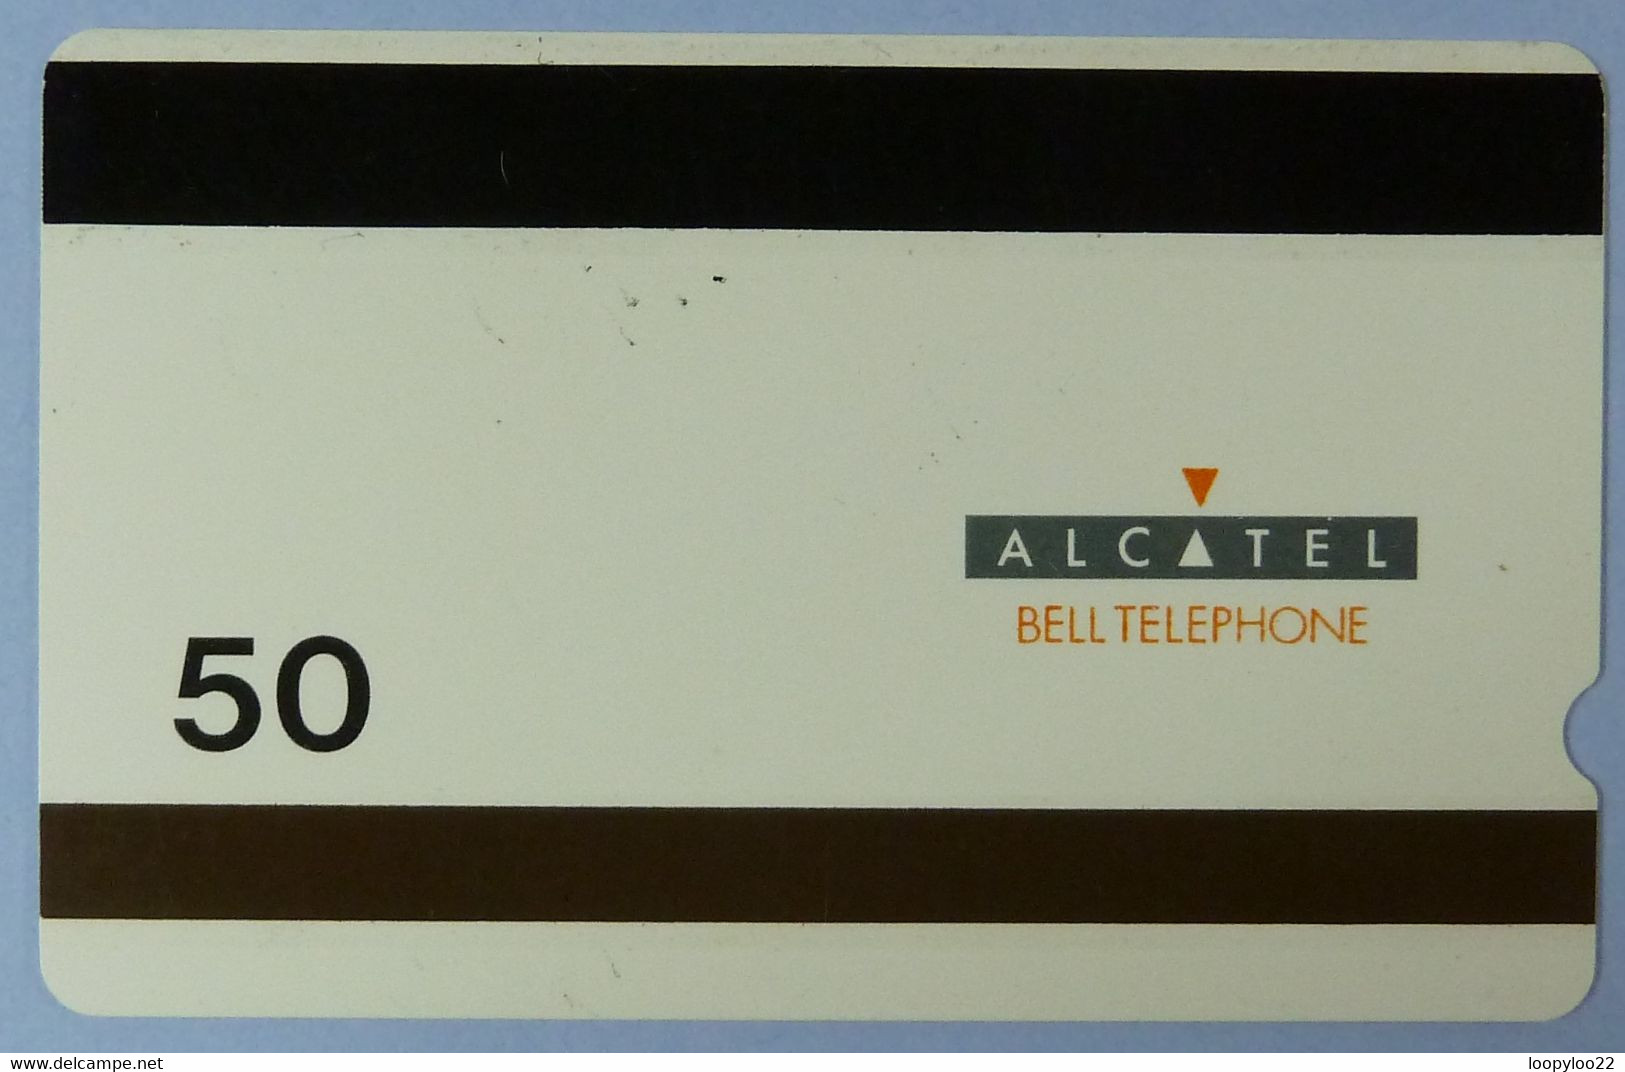 BELGIUM / POLAND- Alcatel - Credifaxphone (Man) - Magnetic - Field Trial / Test - 50 - Bell Telephone - Used - [3] Dienst & Test